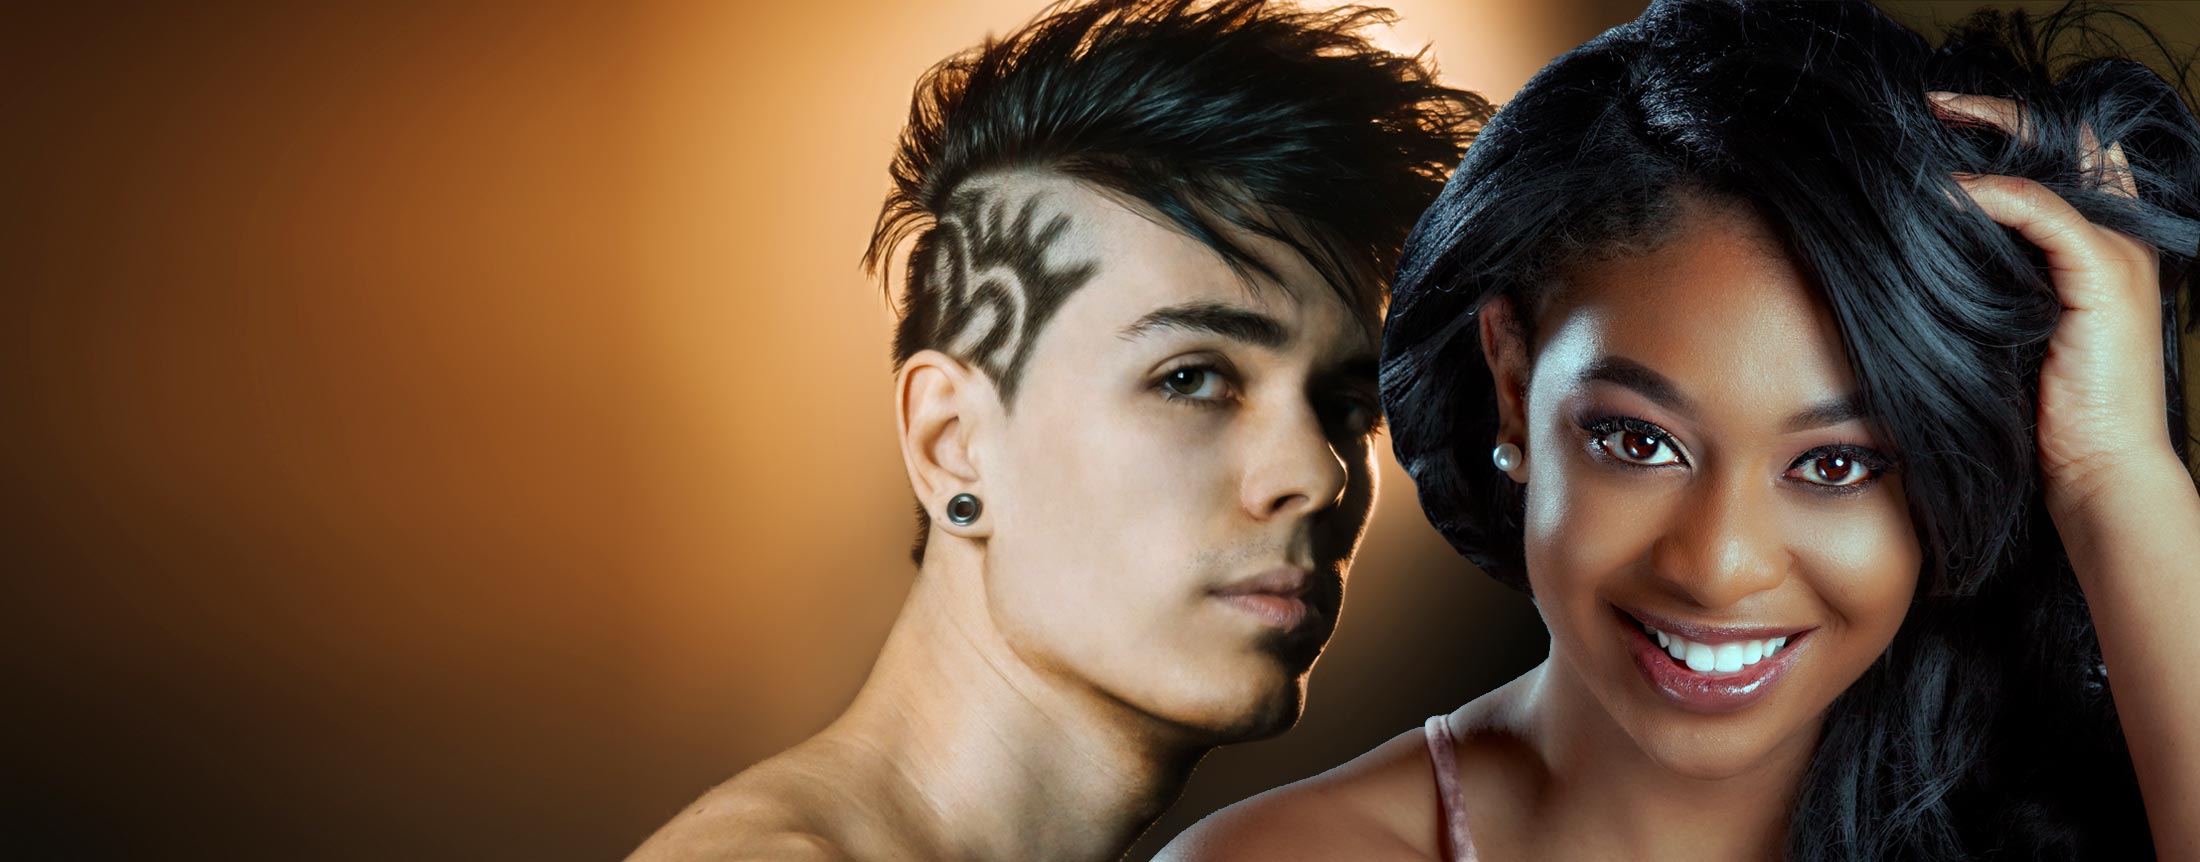 Black Hairstyles with shaved designs